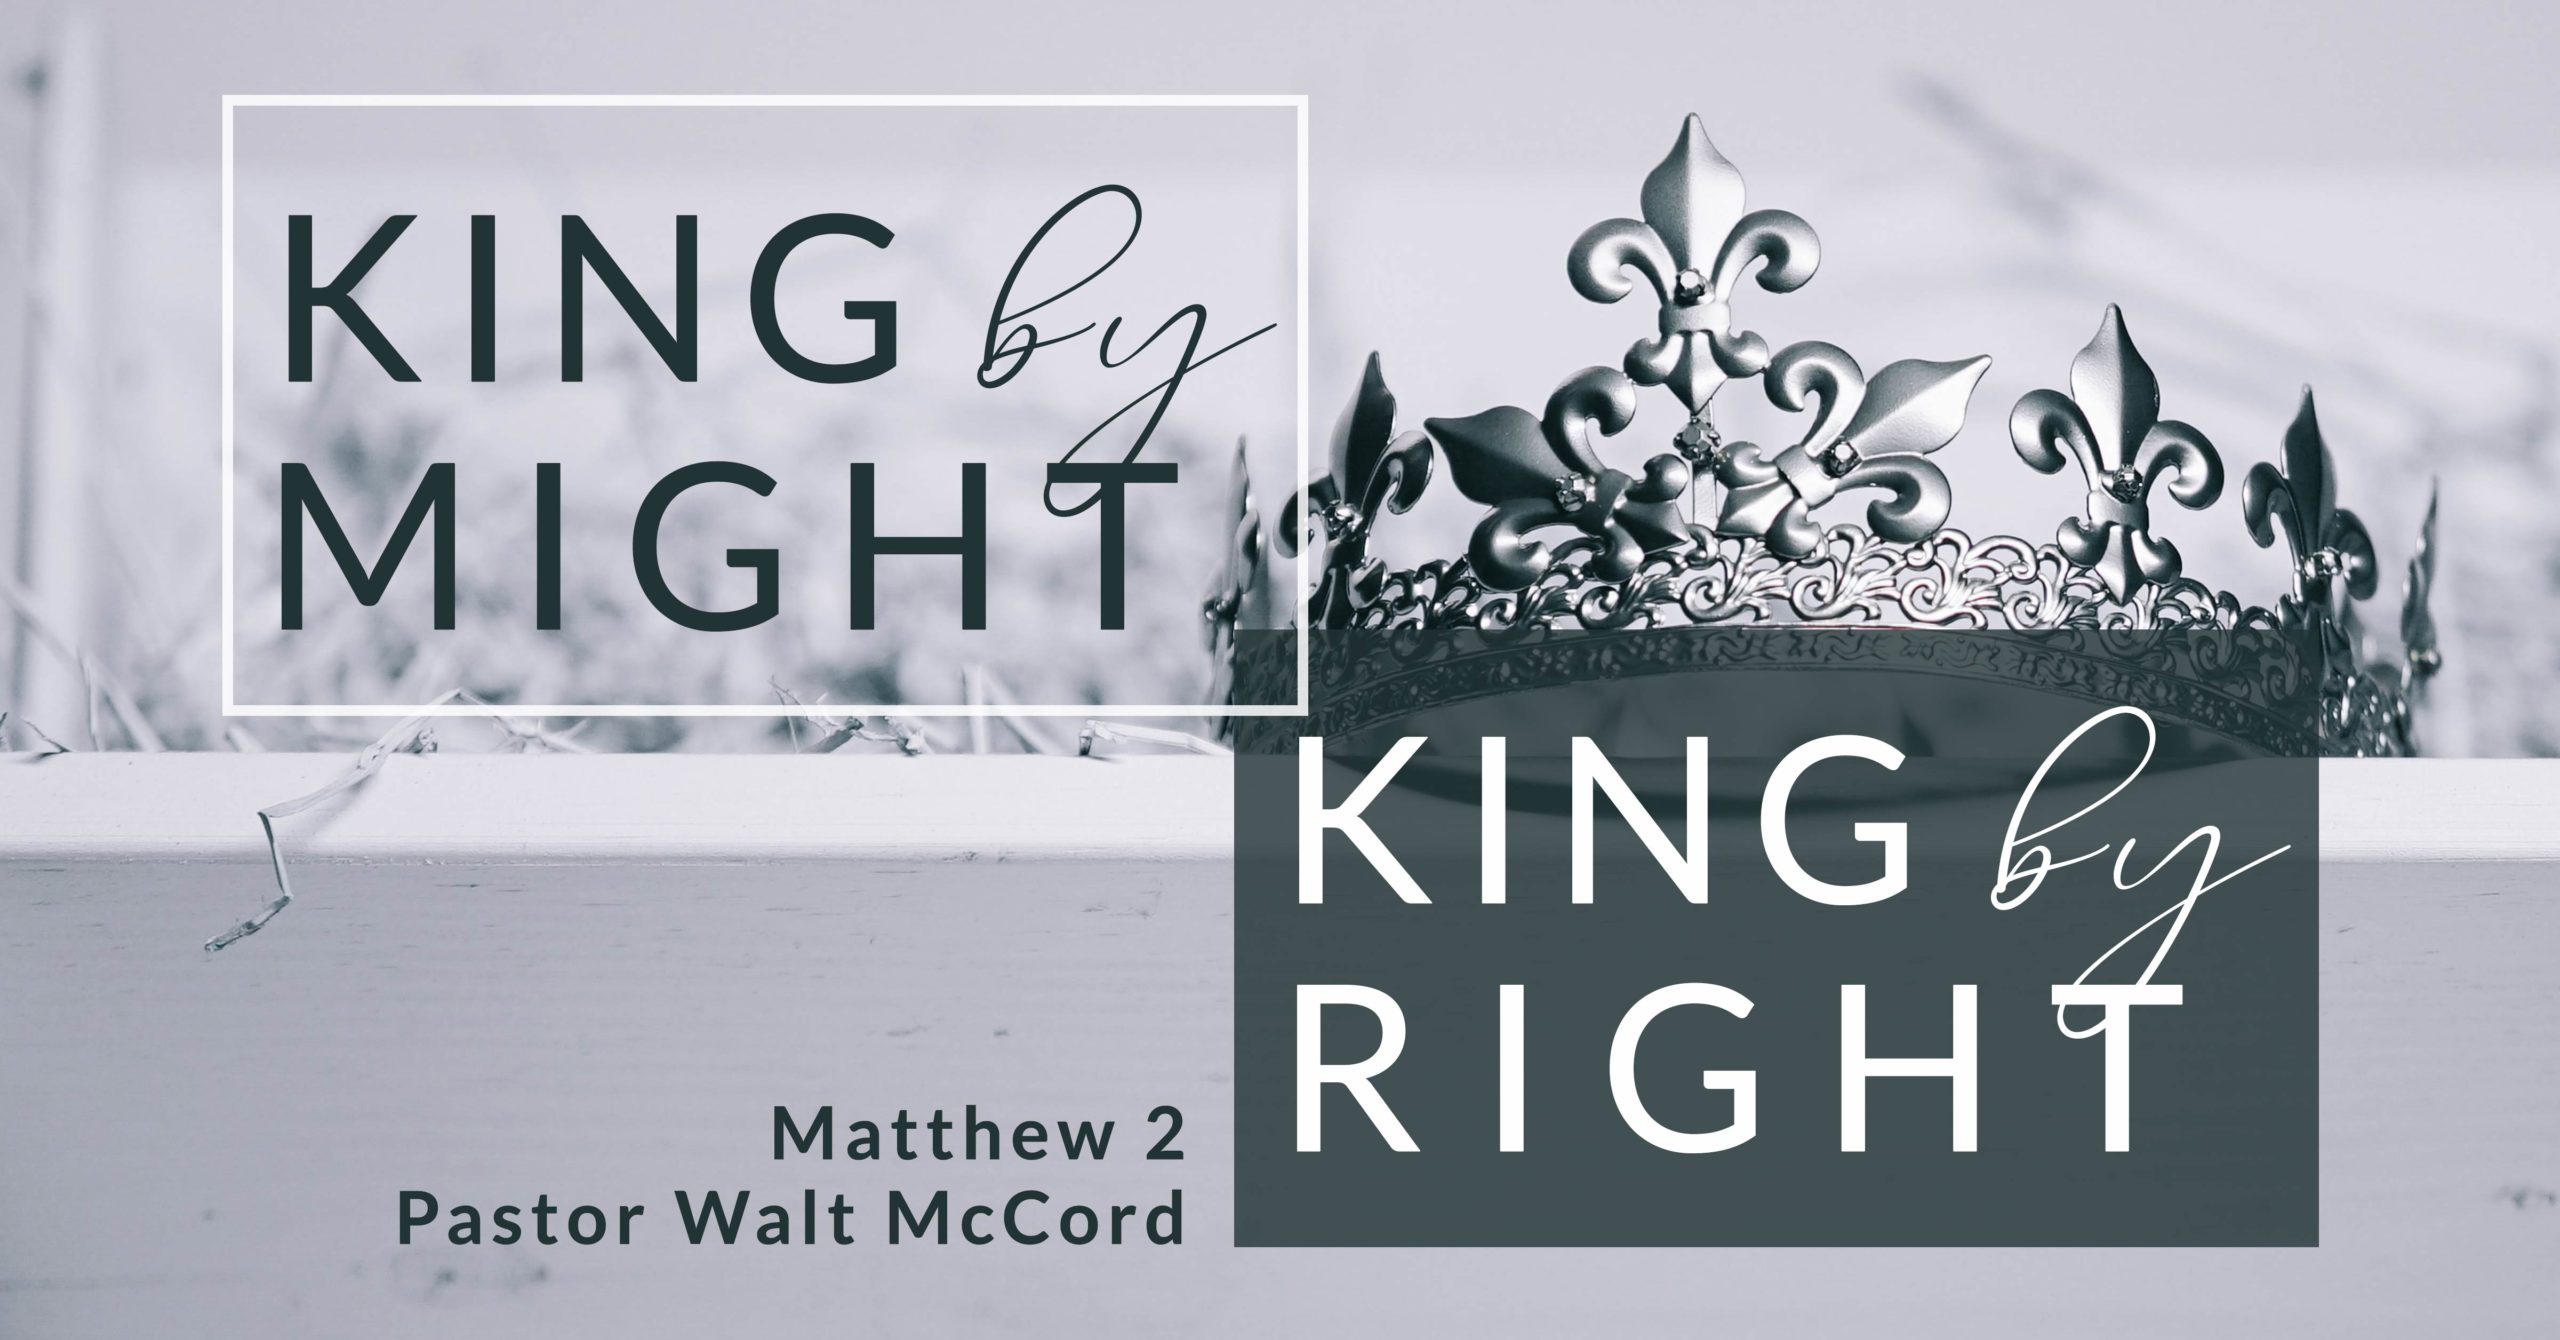 King by Might | King by Right